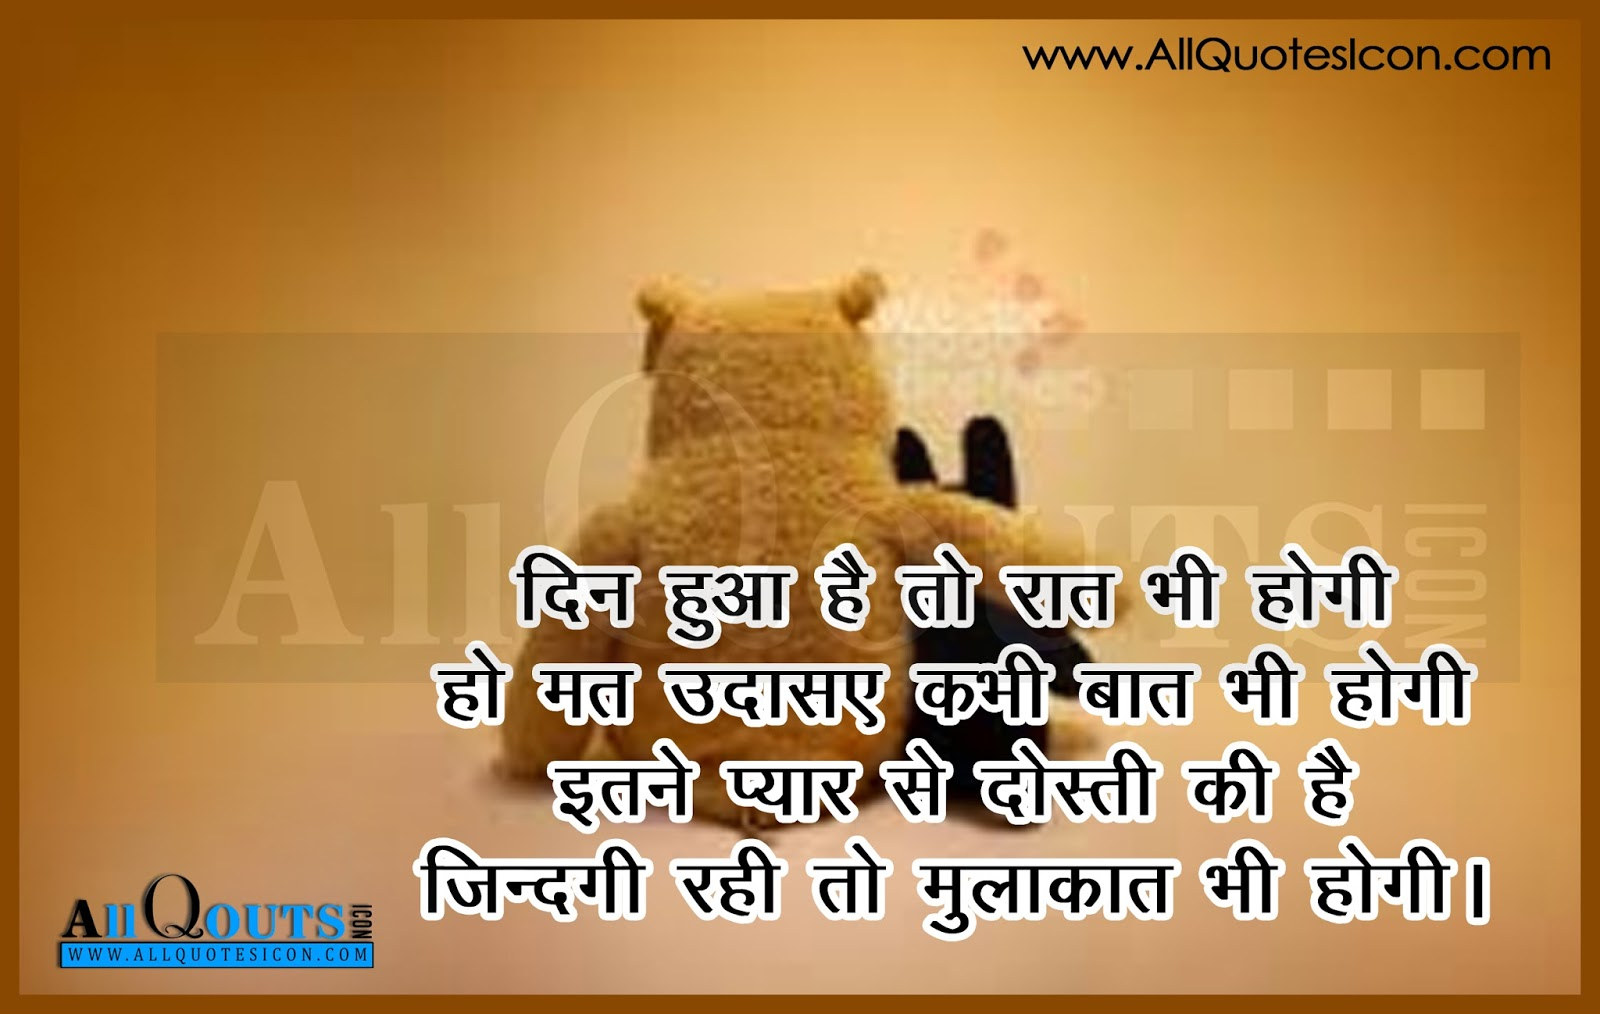 Friendship Quote In Hindi With Image Friendship Thoughts - Kalyan - HD Wallpaper 